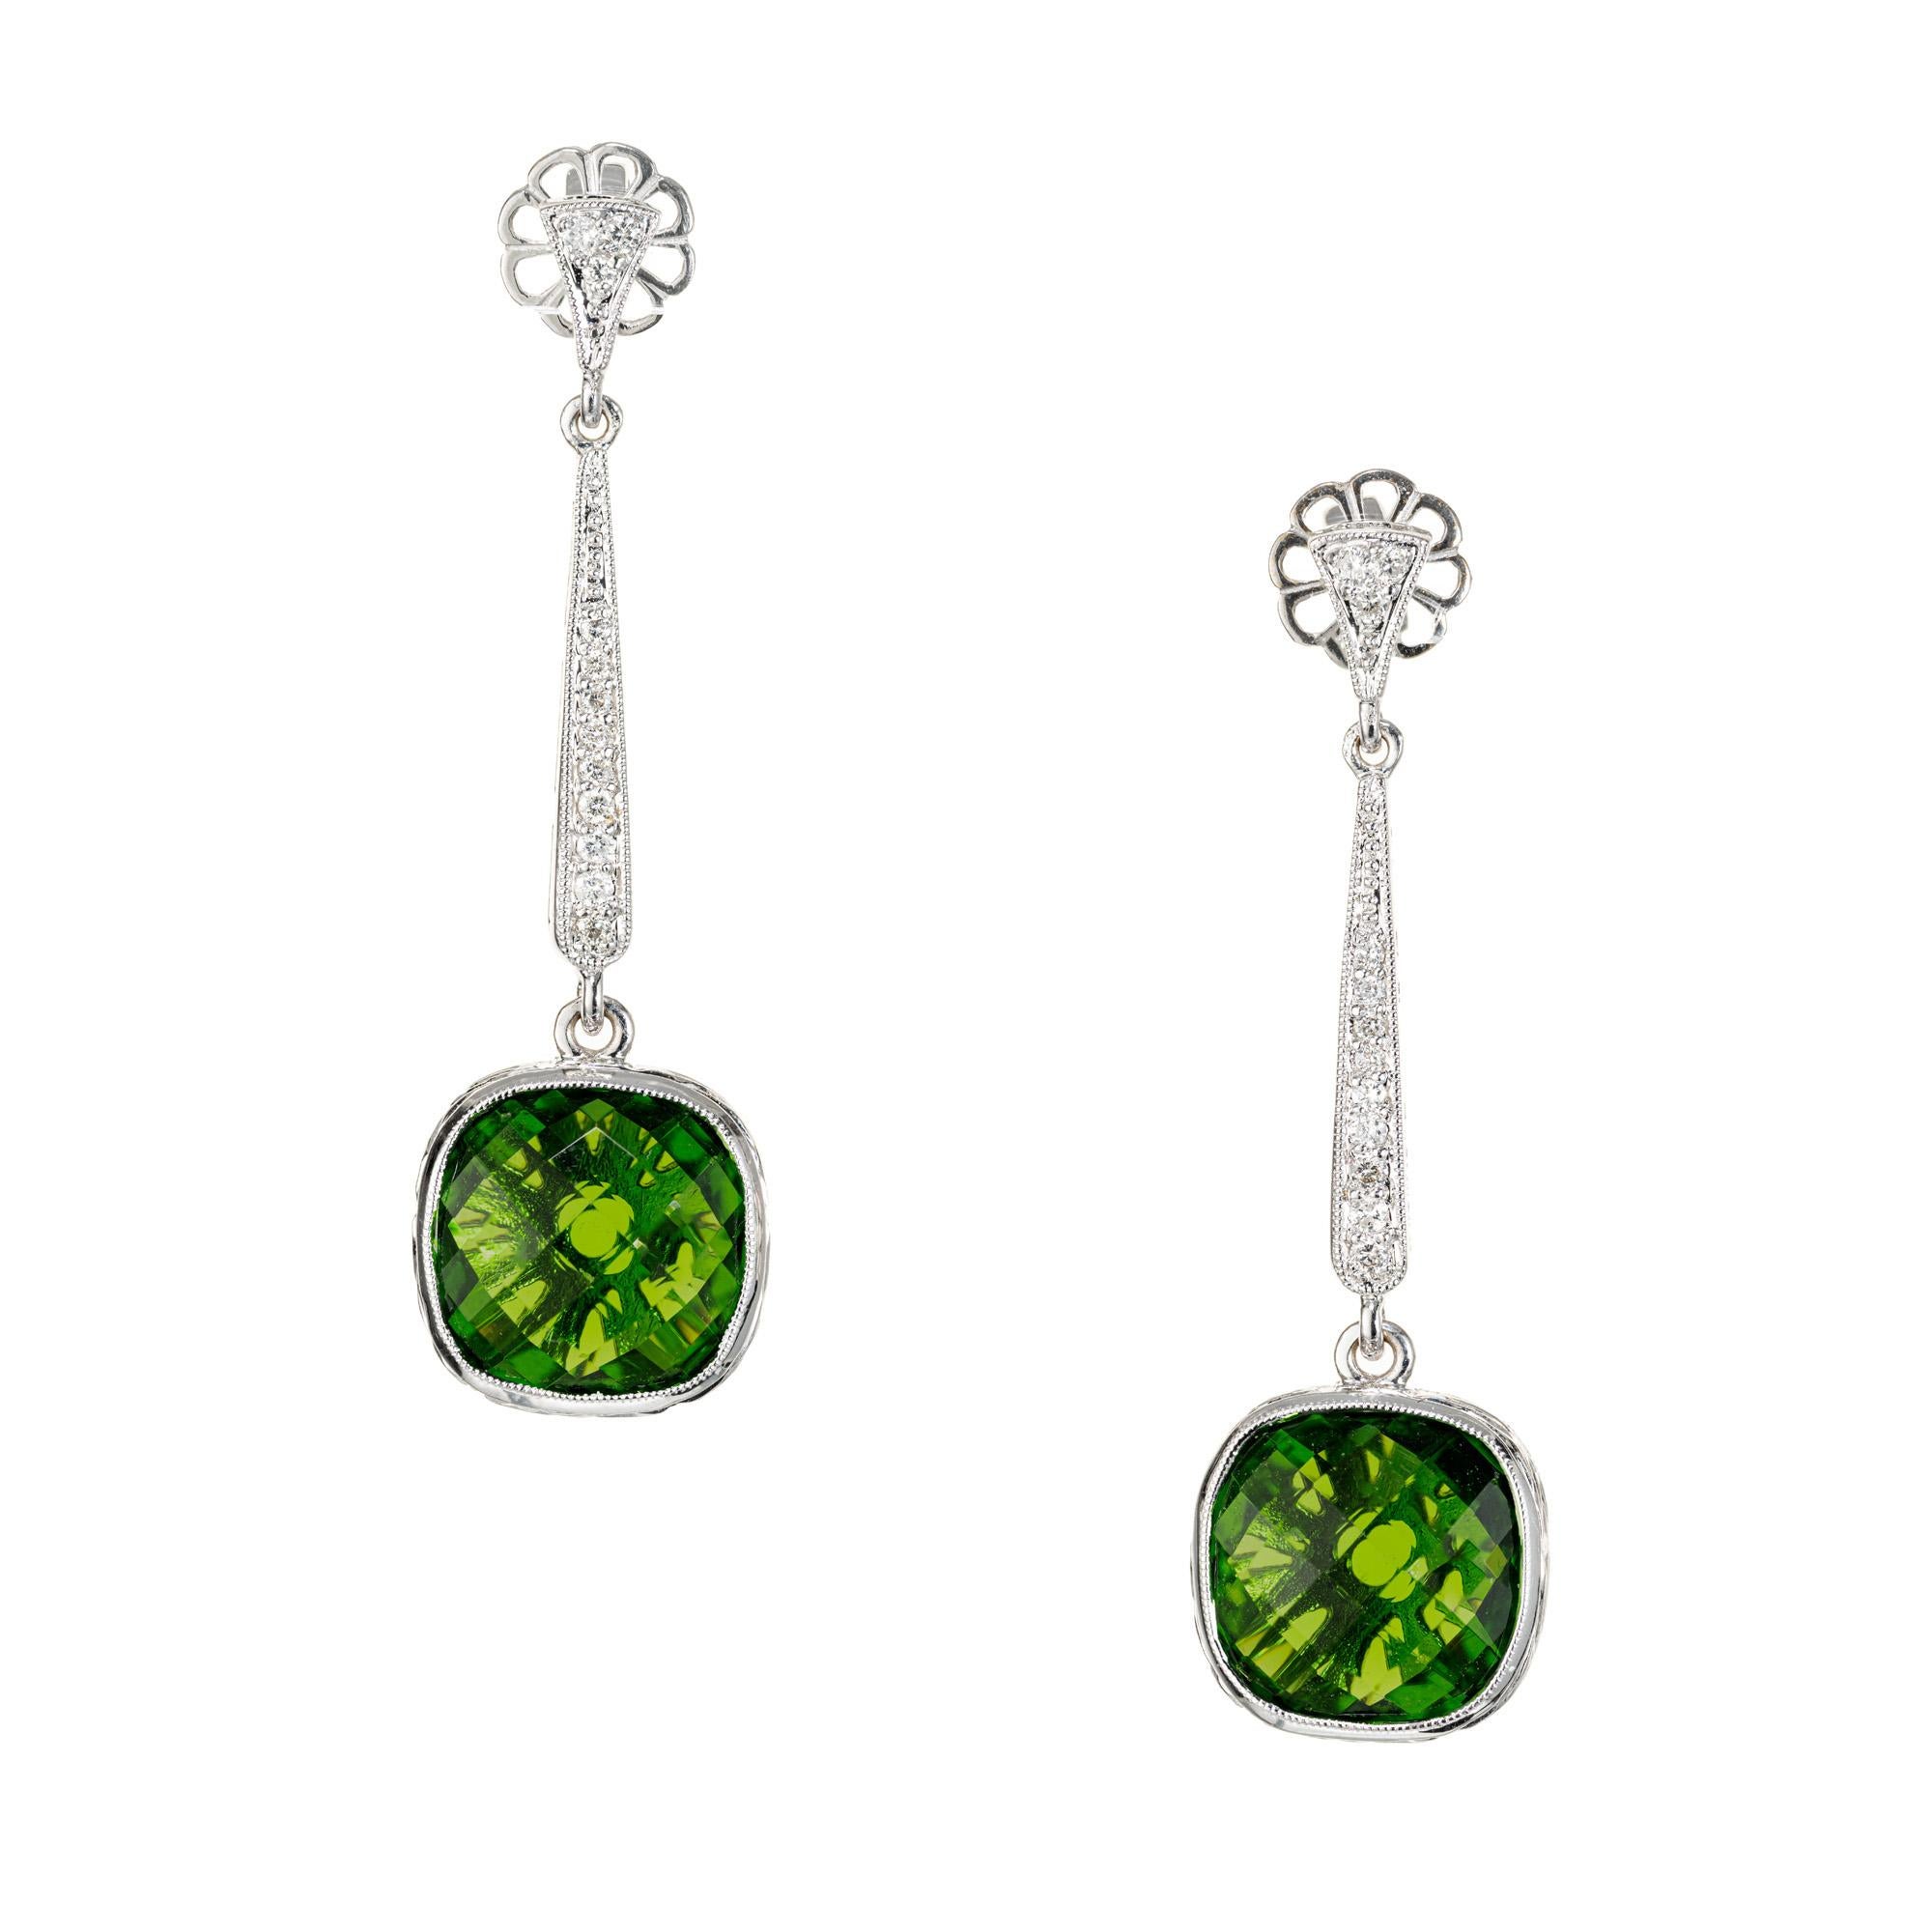 Tourmaline and diamond drop dangle earrings. 2 engraved bezel set cushion cut green tourmalines, set in 18k white gold with 24 round cut accent diamonds. 

2 cushion cut green tourmaline, approx. 5.00cts
24 round diamonds, I-J I approx. .16cts
18k